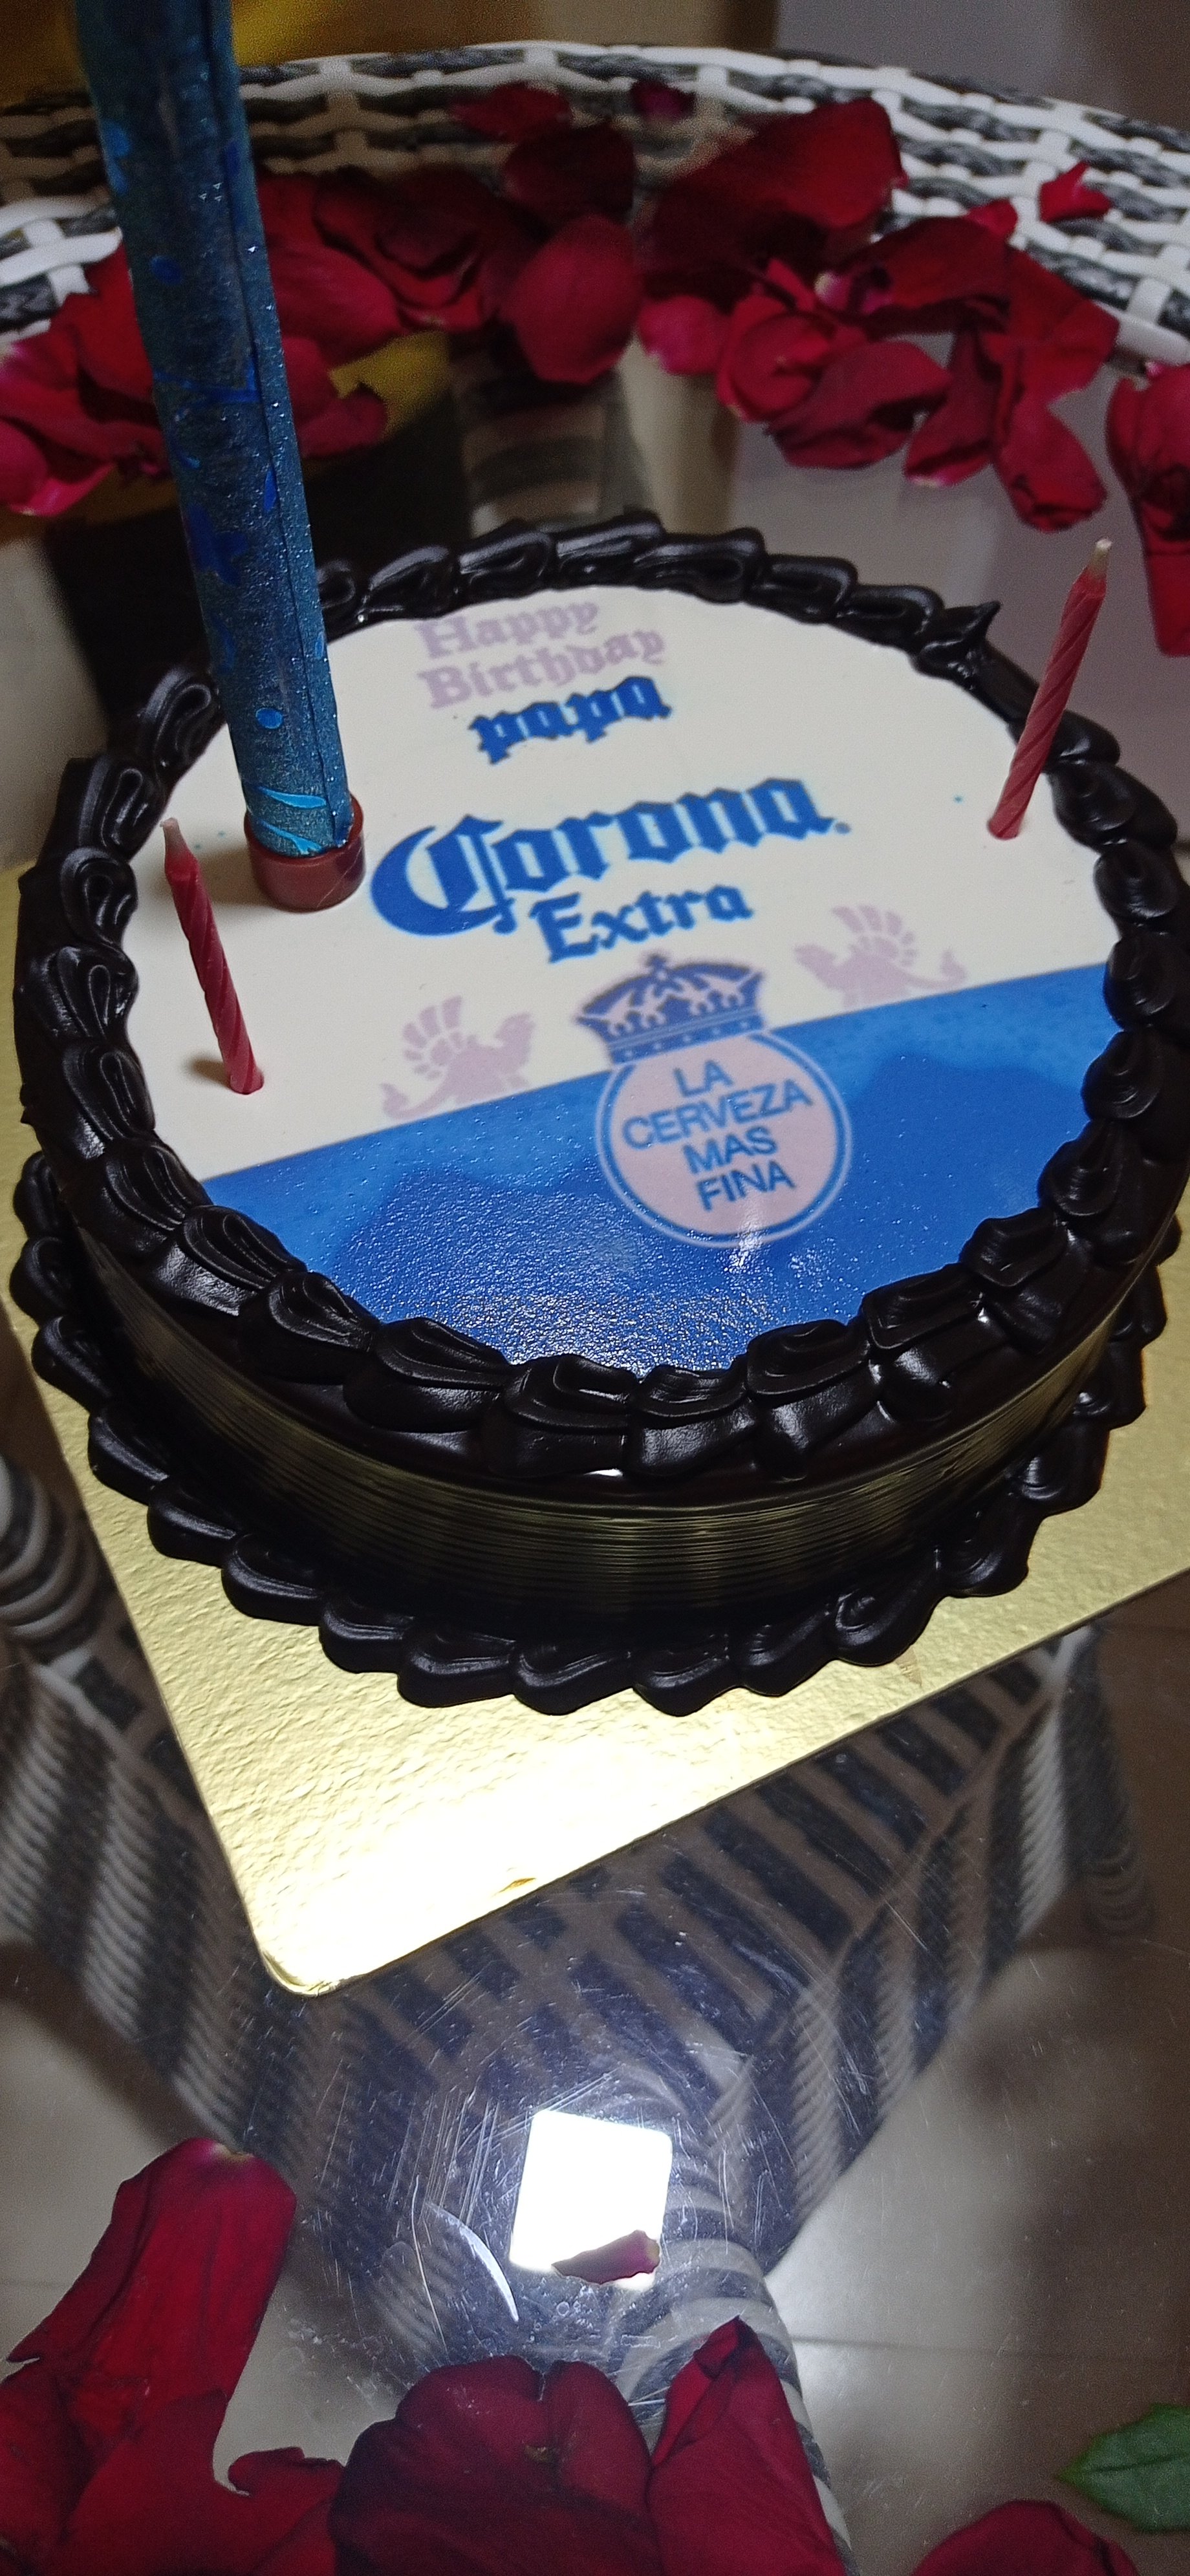 Made a beer pouring into a mug birthday cake for my husband's birthday! :  r/food